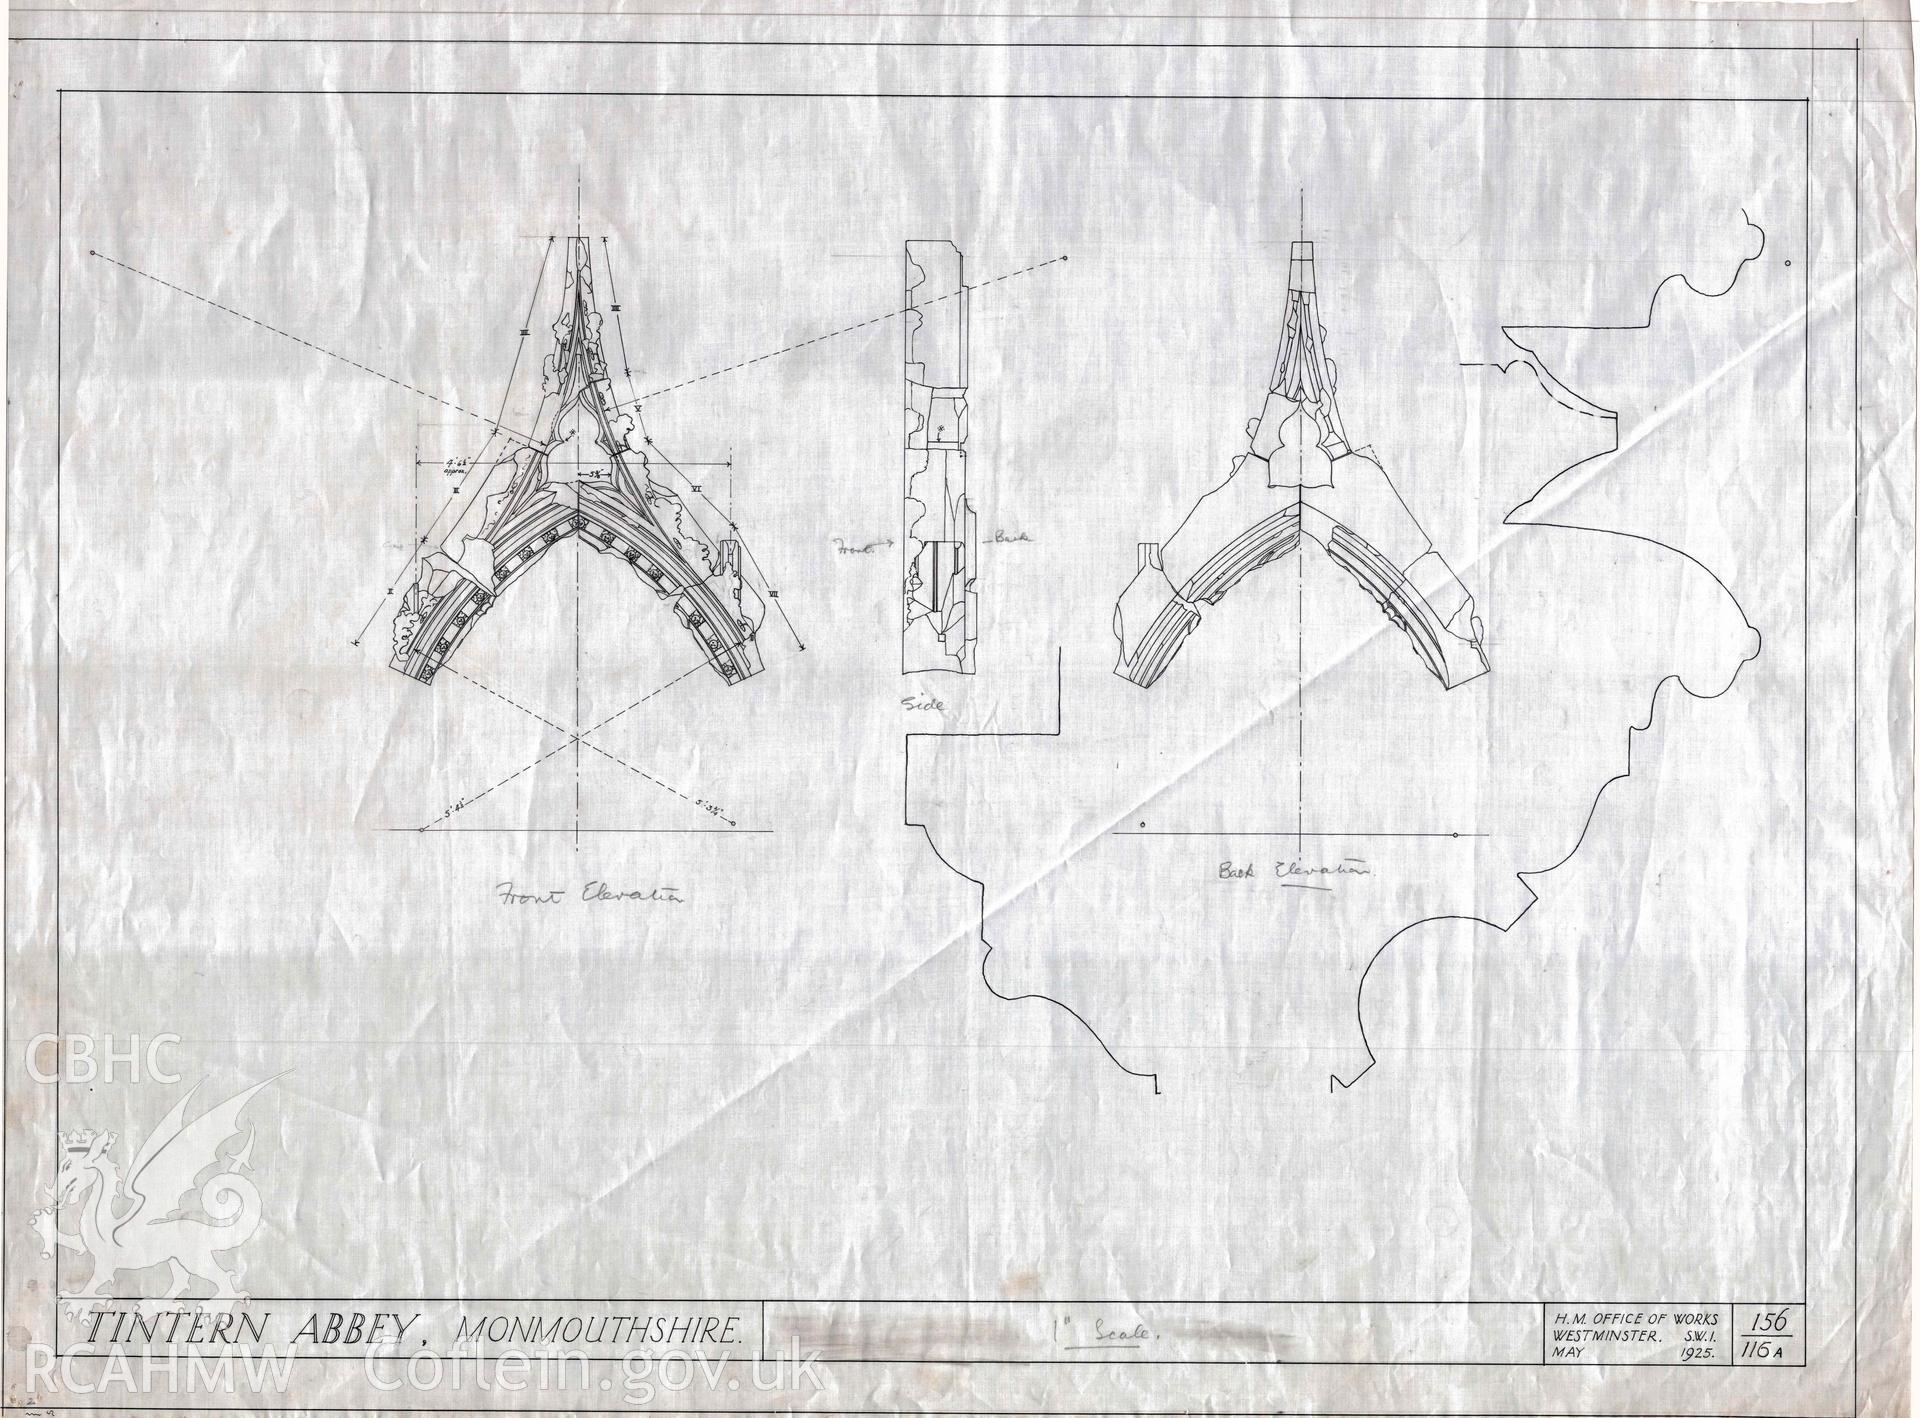 Cadw guardianship monument drawing, front, side and back elevations of screen at Tintern Abbey, dated May 1925.